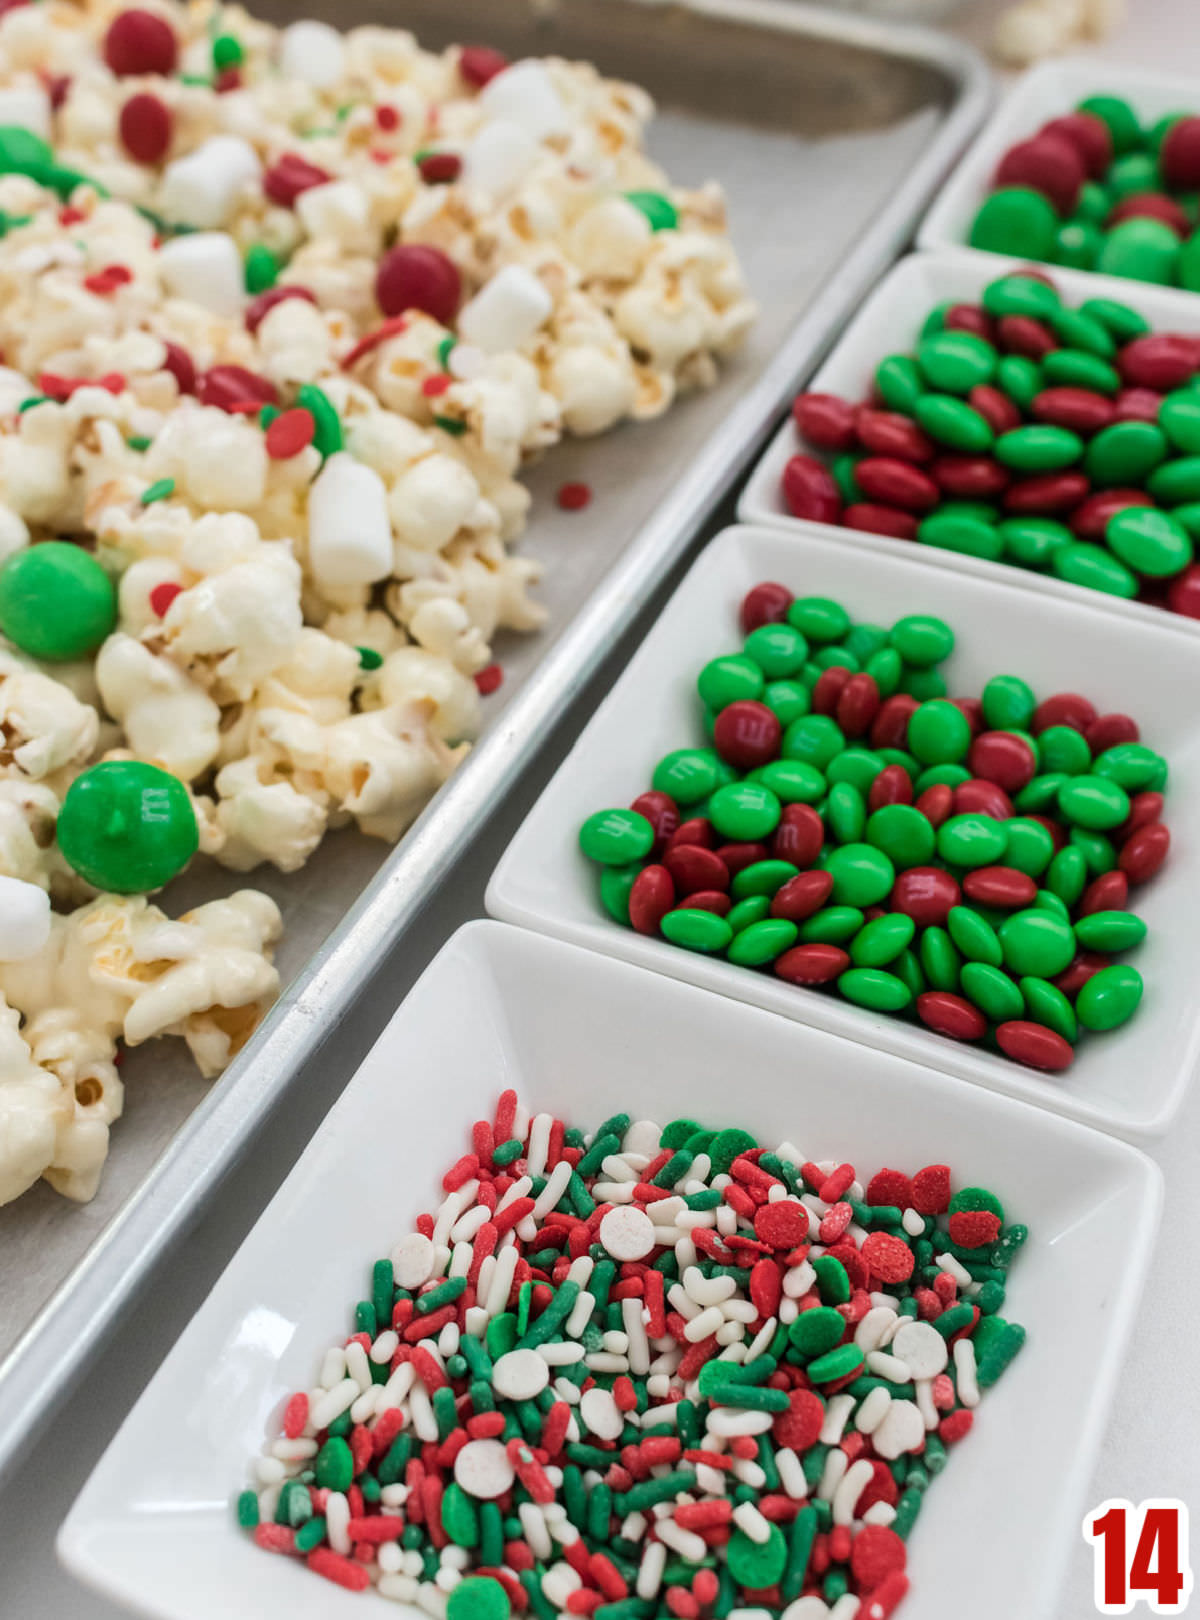 Closeup on all the Christmas colored candy mix-ins we used for the Marshmallow Popcorn.